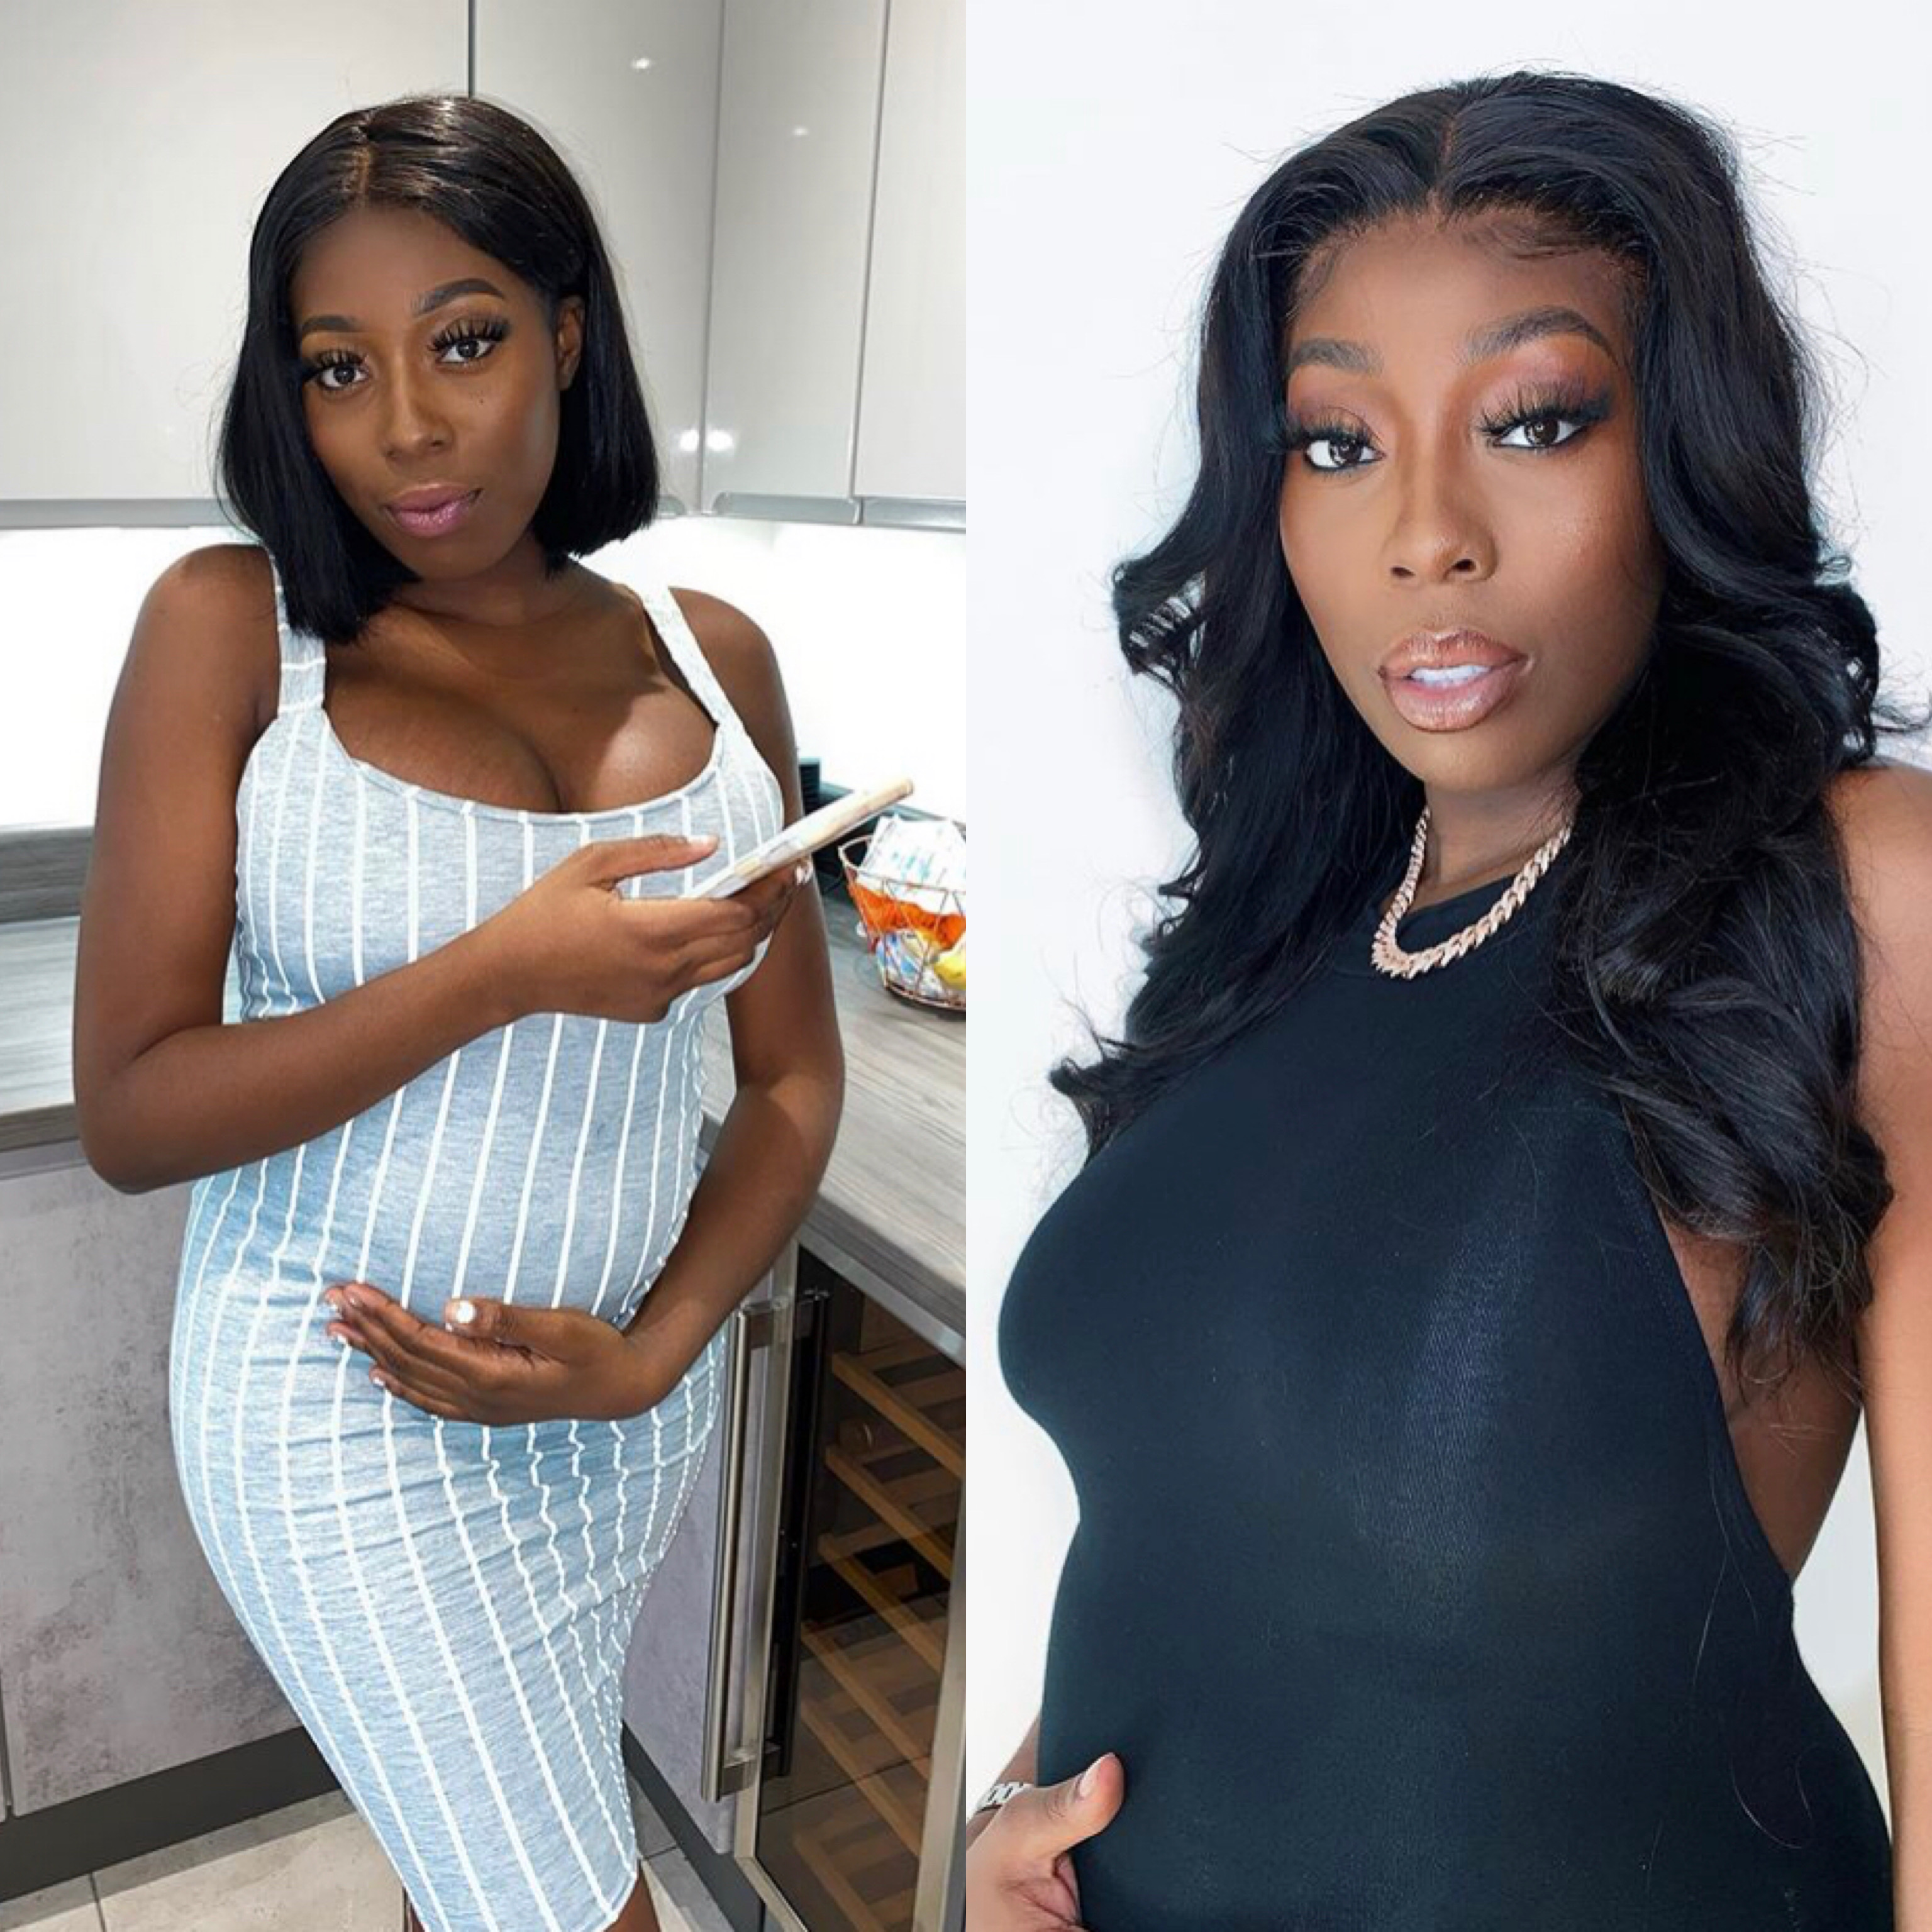 Heavily pregnant YouTube star Nicole Thea passes on